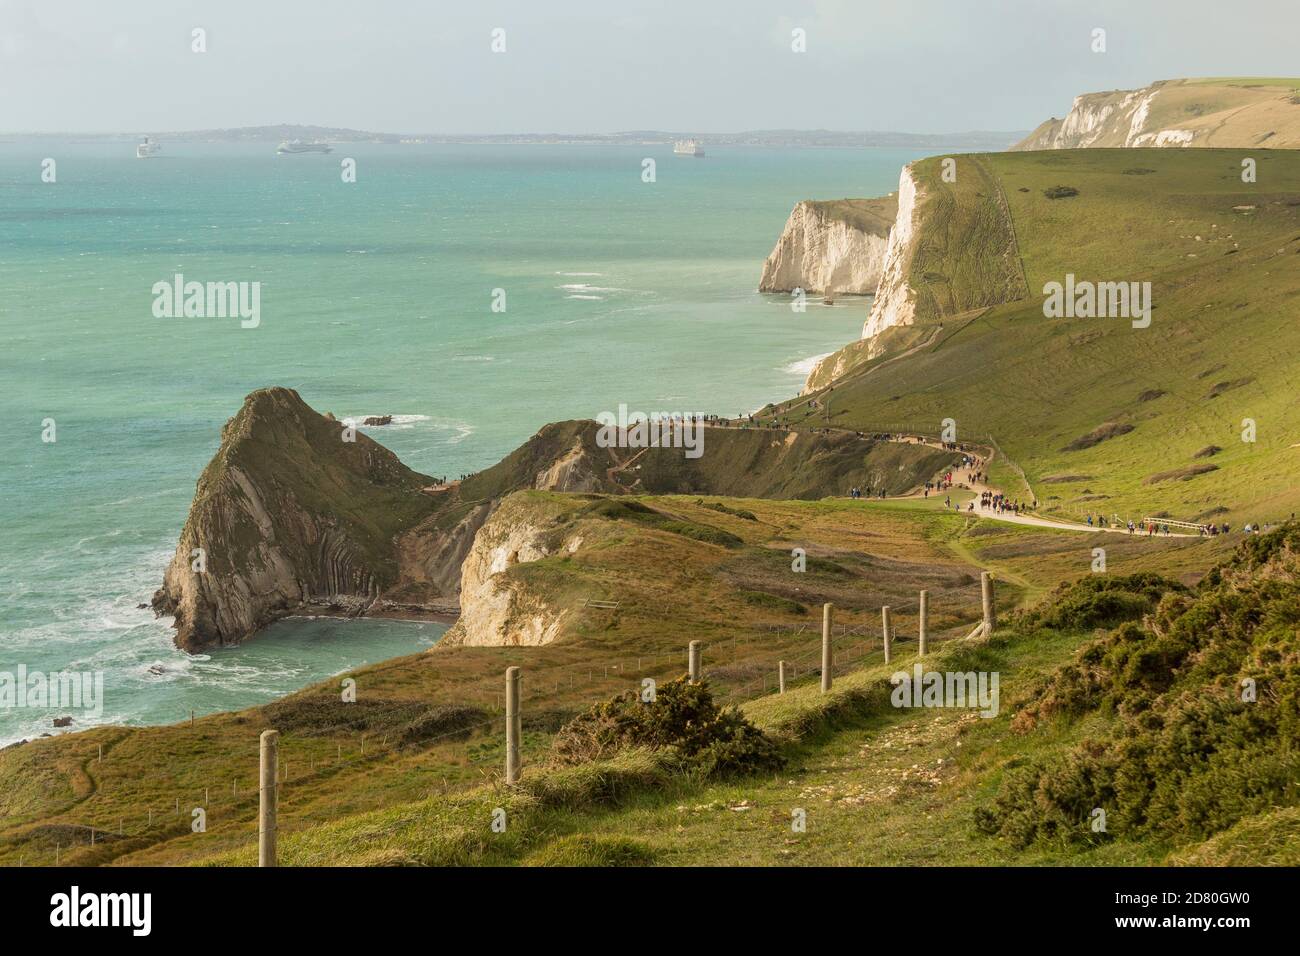 This is an image of the Jurassic Coastline in Dorset, England taken from the main pathway. Stock Photo